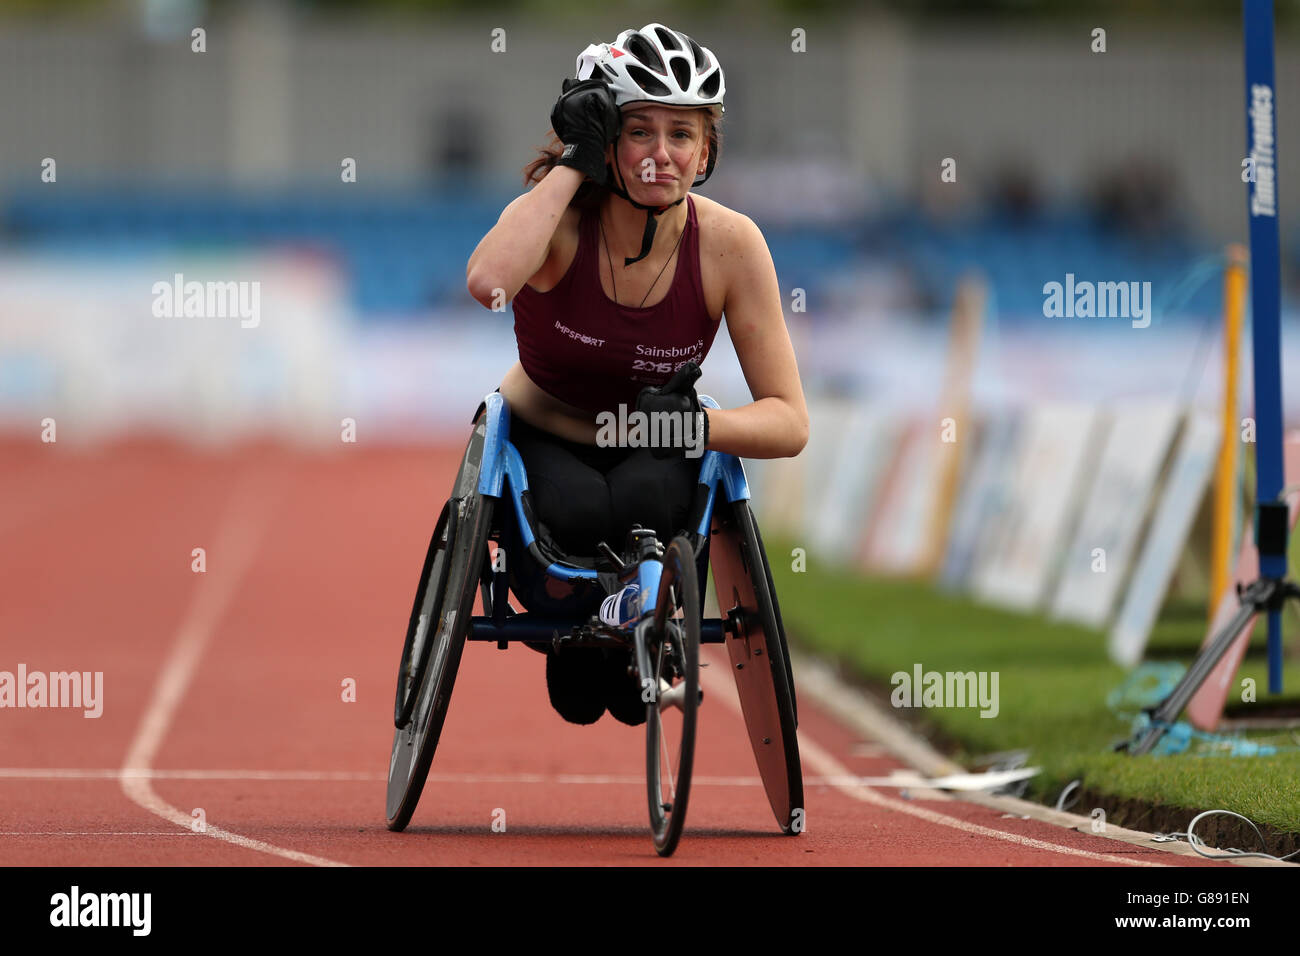 England North West's Catherine Scott is overcome with emotion as she crosses the line in the girls 800m wheelchair event at the Sainsbury's 2015 School Games at the Manchester Regional Arena. Stock Photo